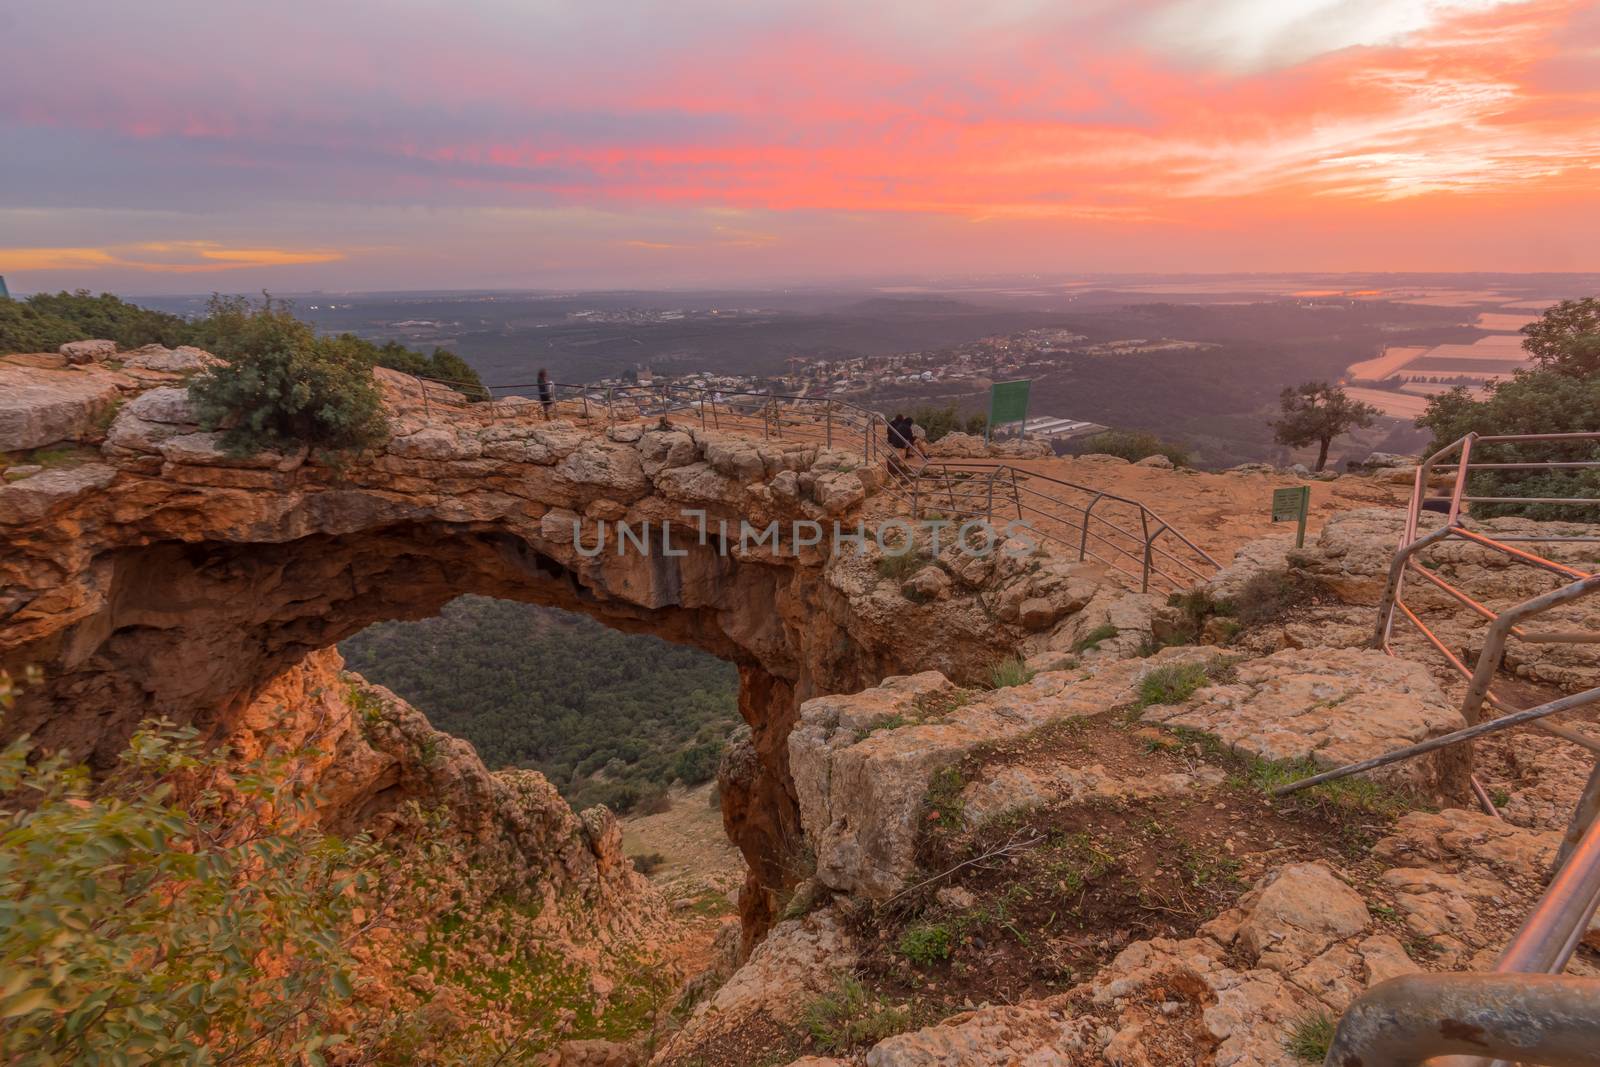 Sunset view of the Keshet Cave, a limestone archway spanning the remains of a shallow cave, in Adamit Park, Western Galilee, Northern Israel